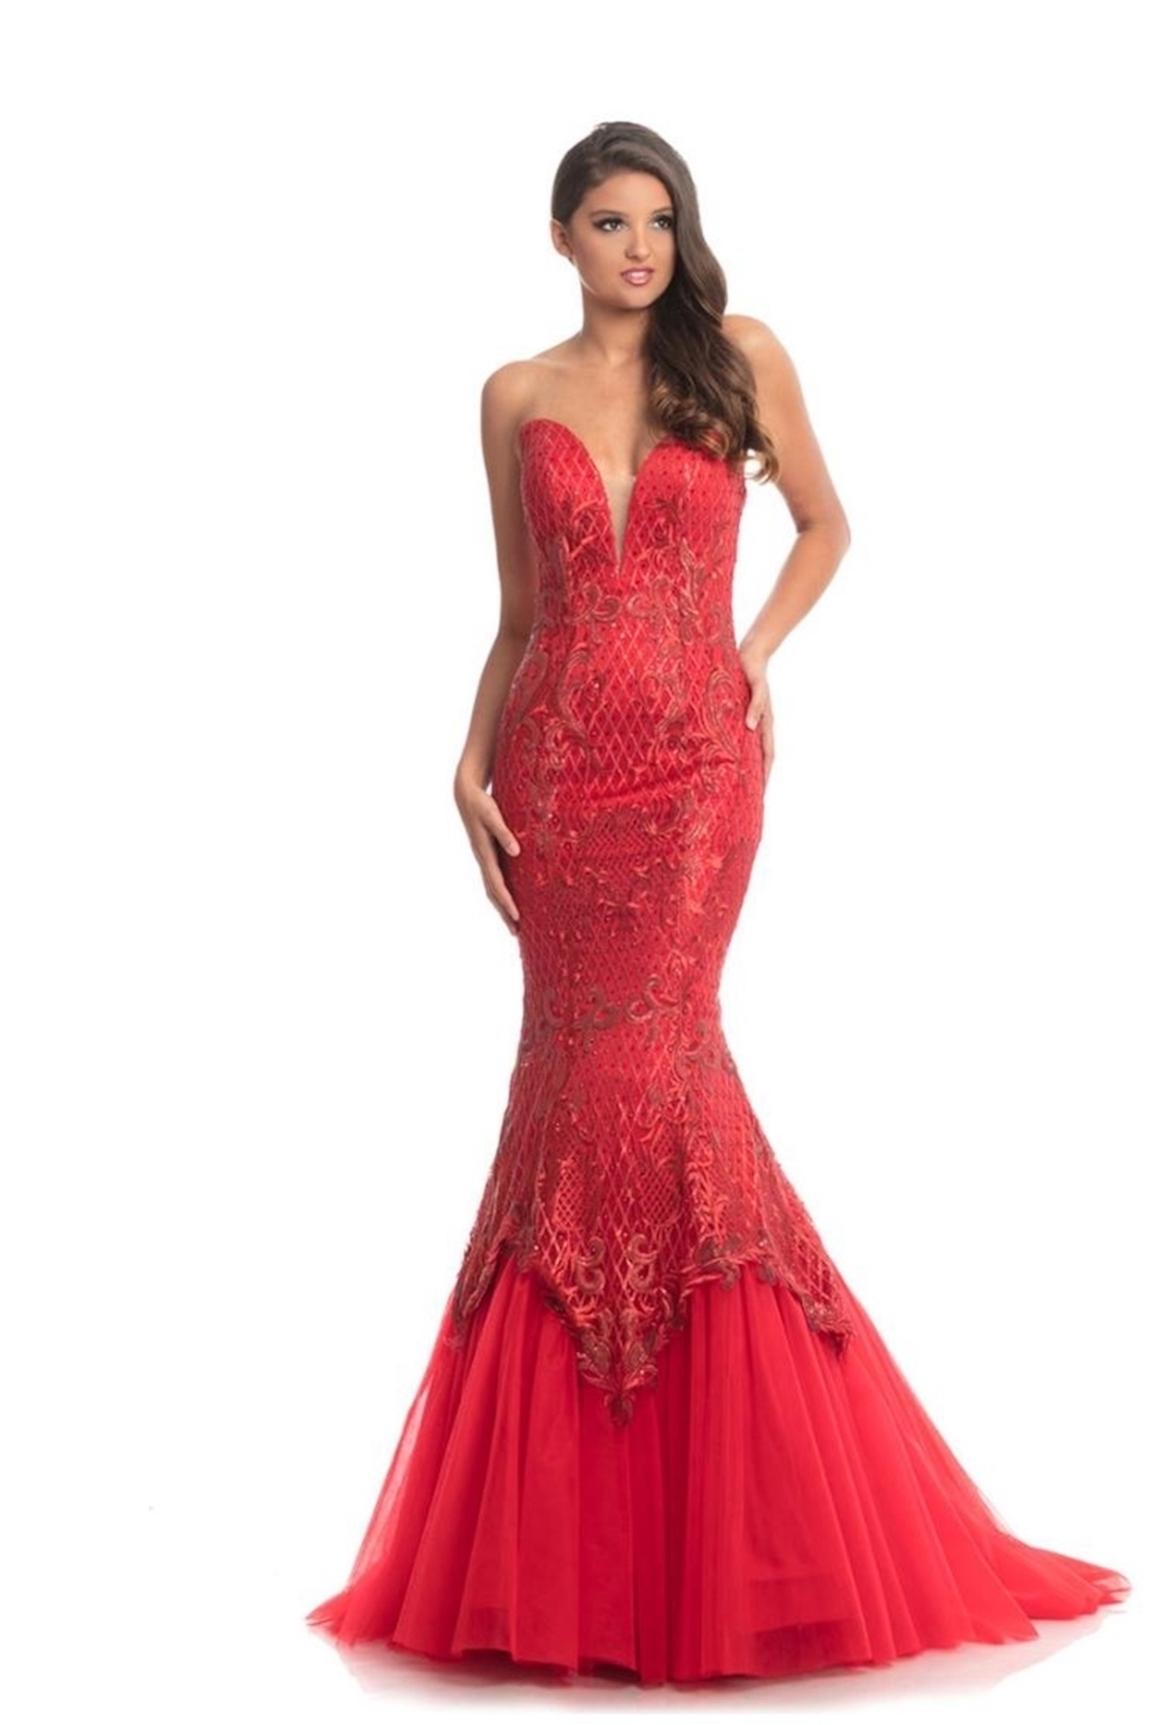 Style DARING STRAPLESS GOWN Johnathan Kayne Size 8 Prom Strapless Lace Red Mermaid Dress on Queenly